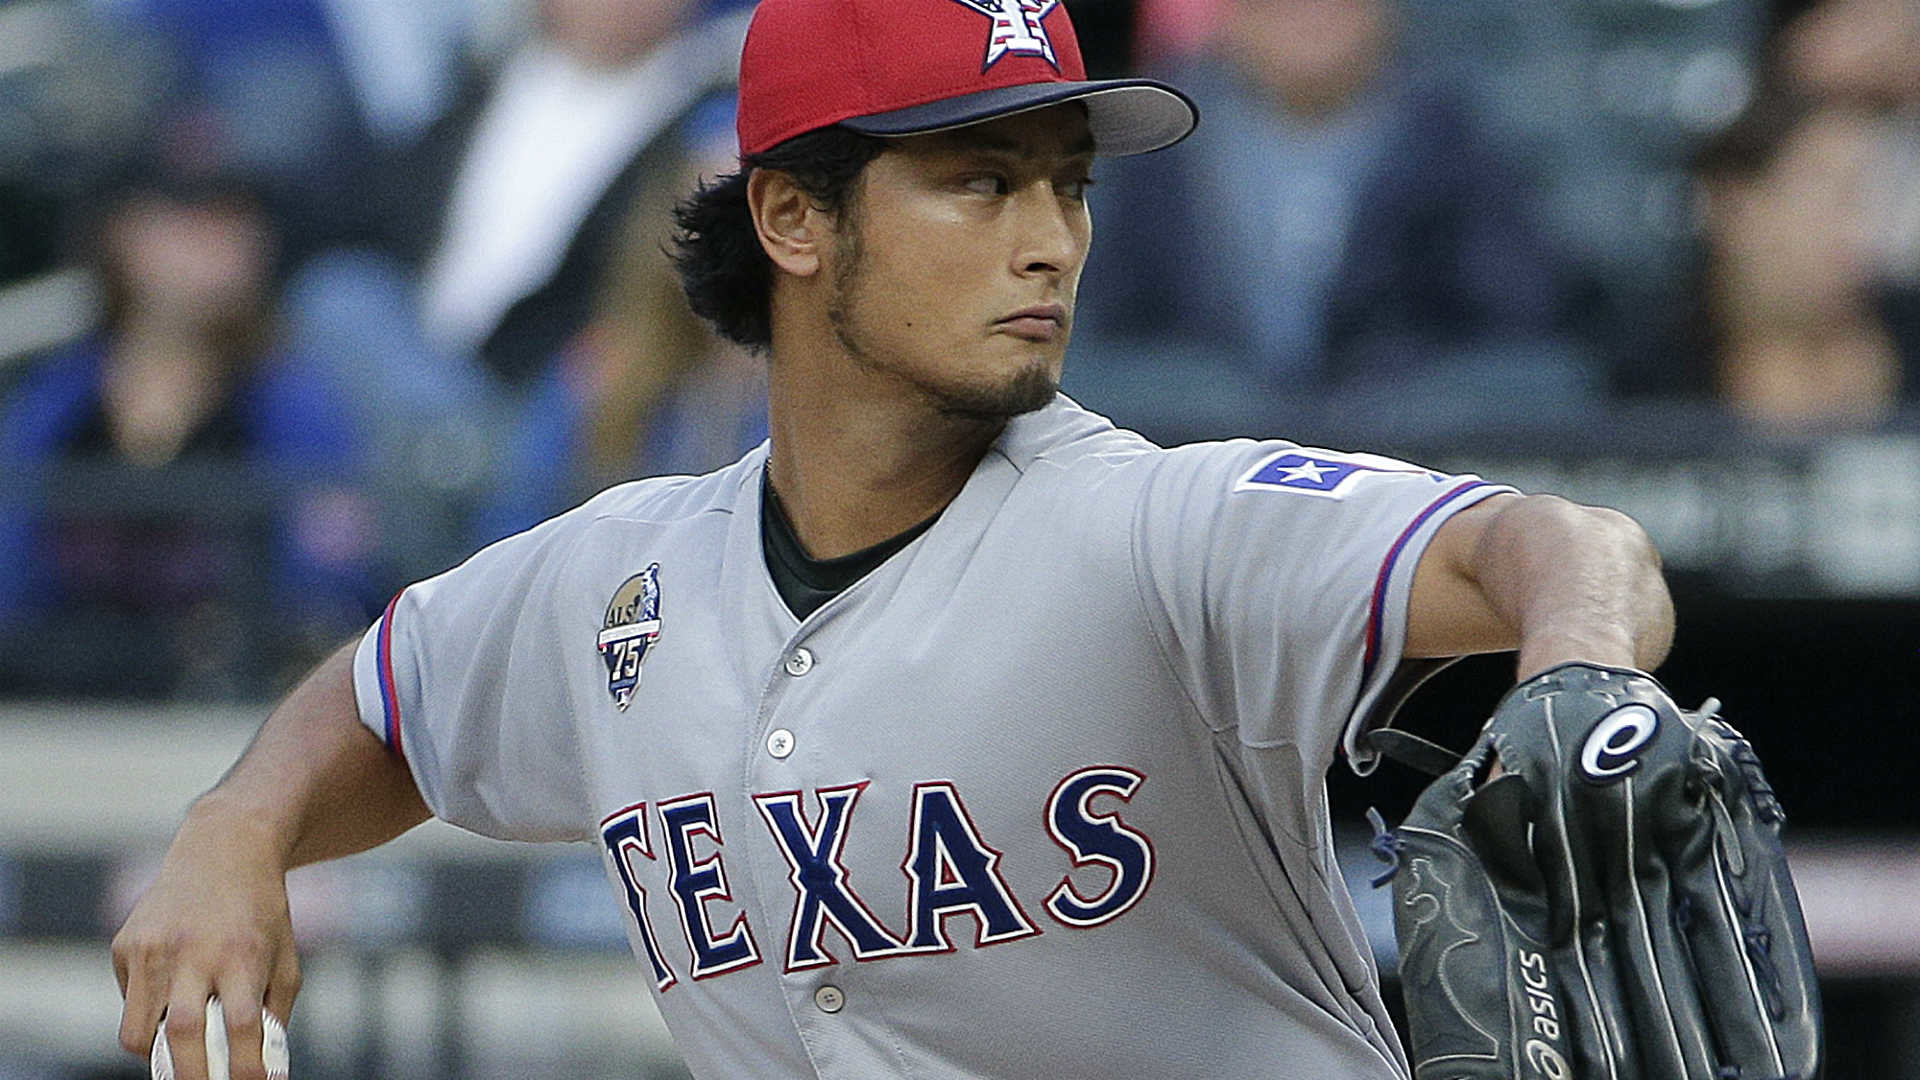 1920x1080 Yu Darvish not focus of MLB's probe into brother's activities, report says  | MLB | Sporting News